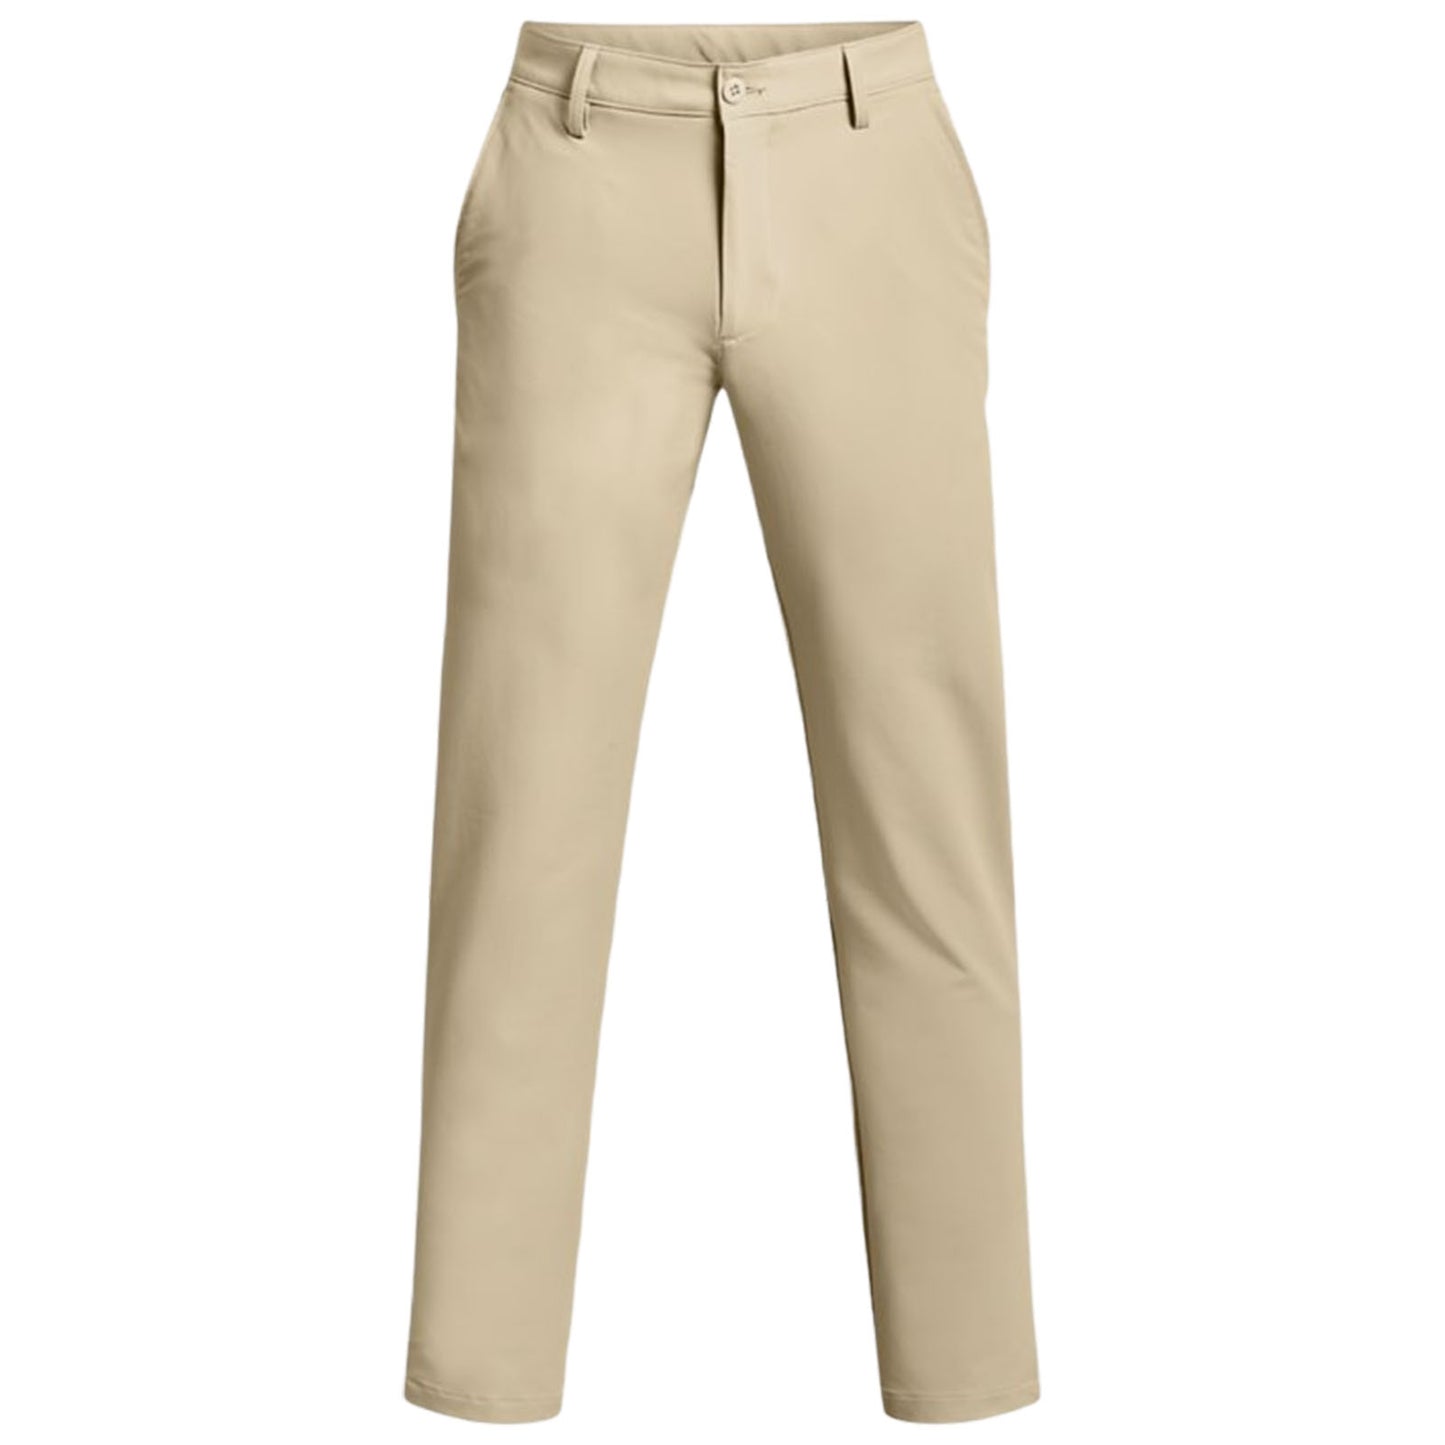 Under Armour Mens Matchplay Trousers